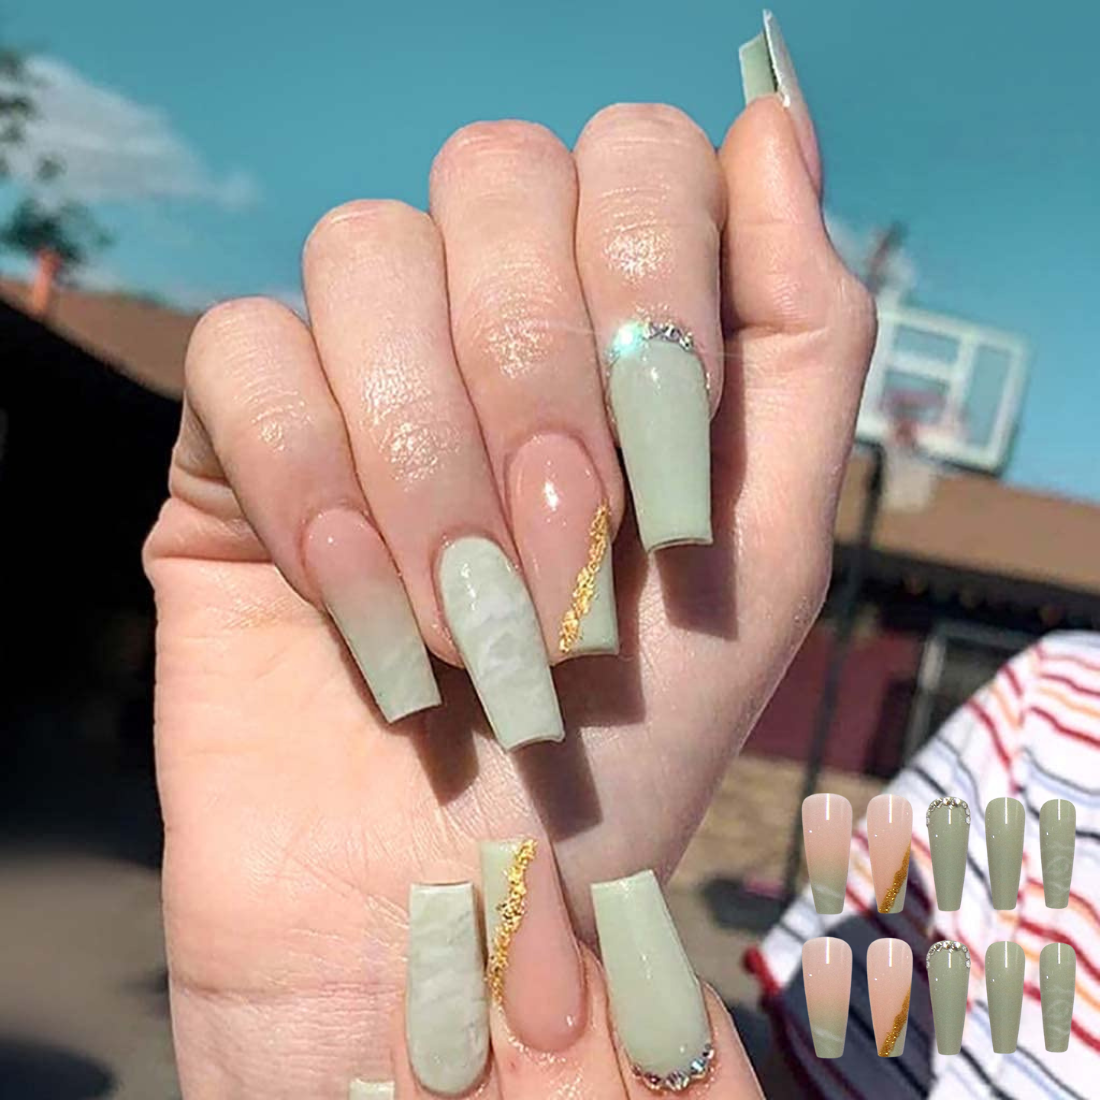 5 Stunning Green Coffin Nails You Need to Try - Nail Art Ideas and Tips